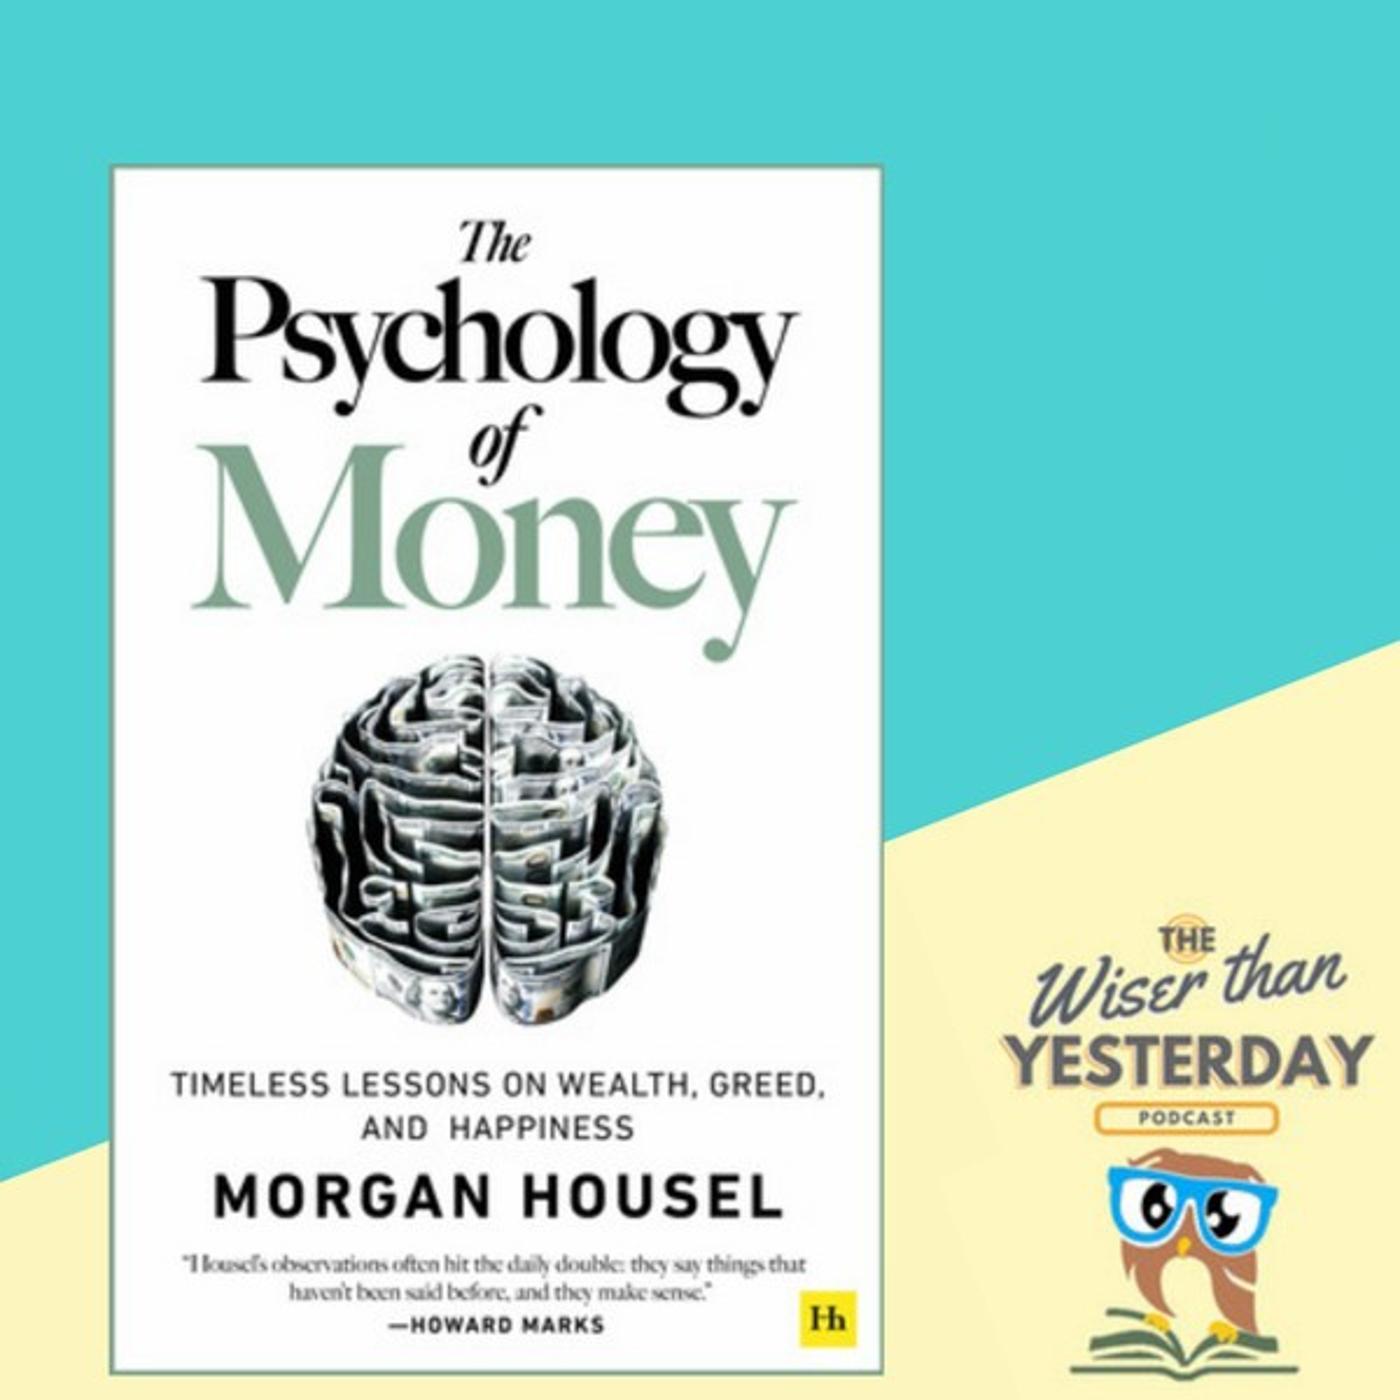 Investing: The Psychology of Money: Timeless Lessons on Wealth, Greed, and Happiness by Morgan Housel